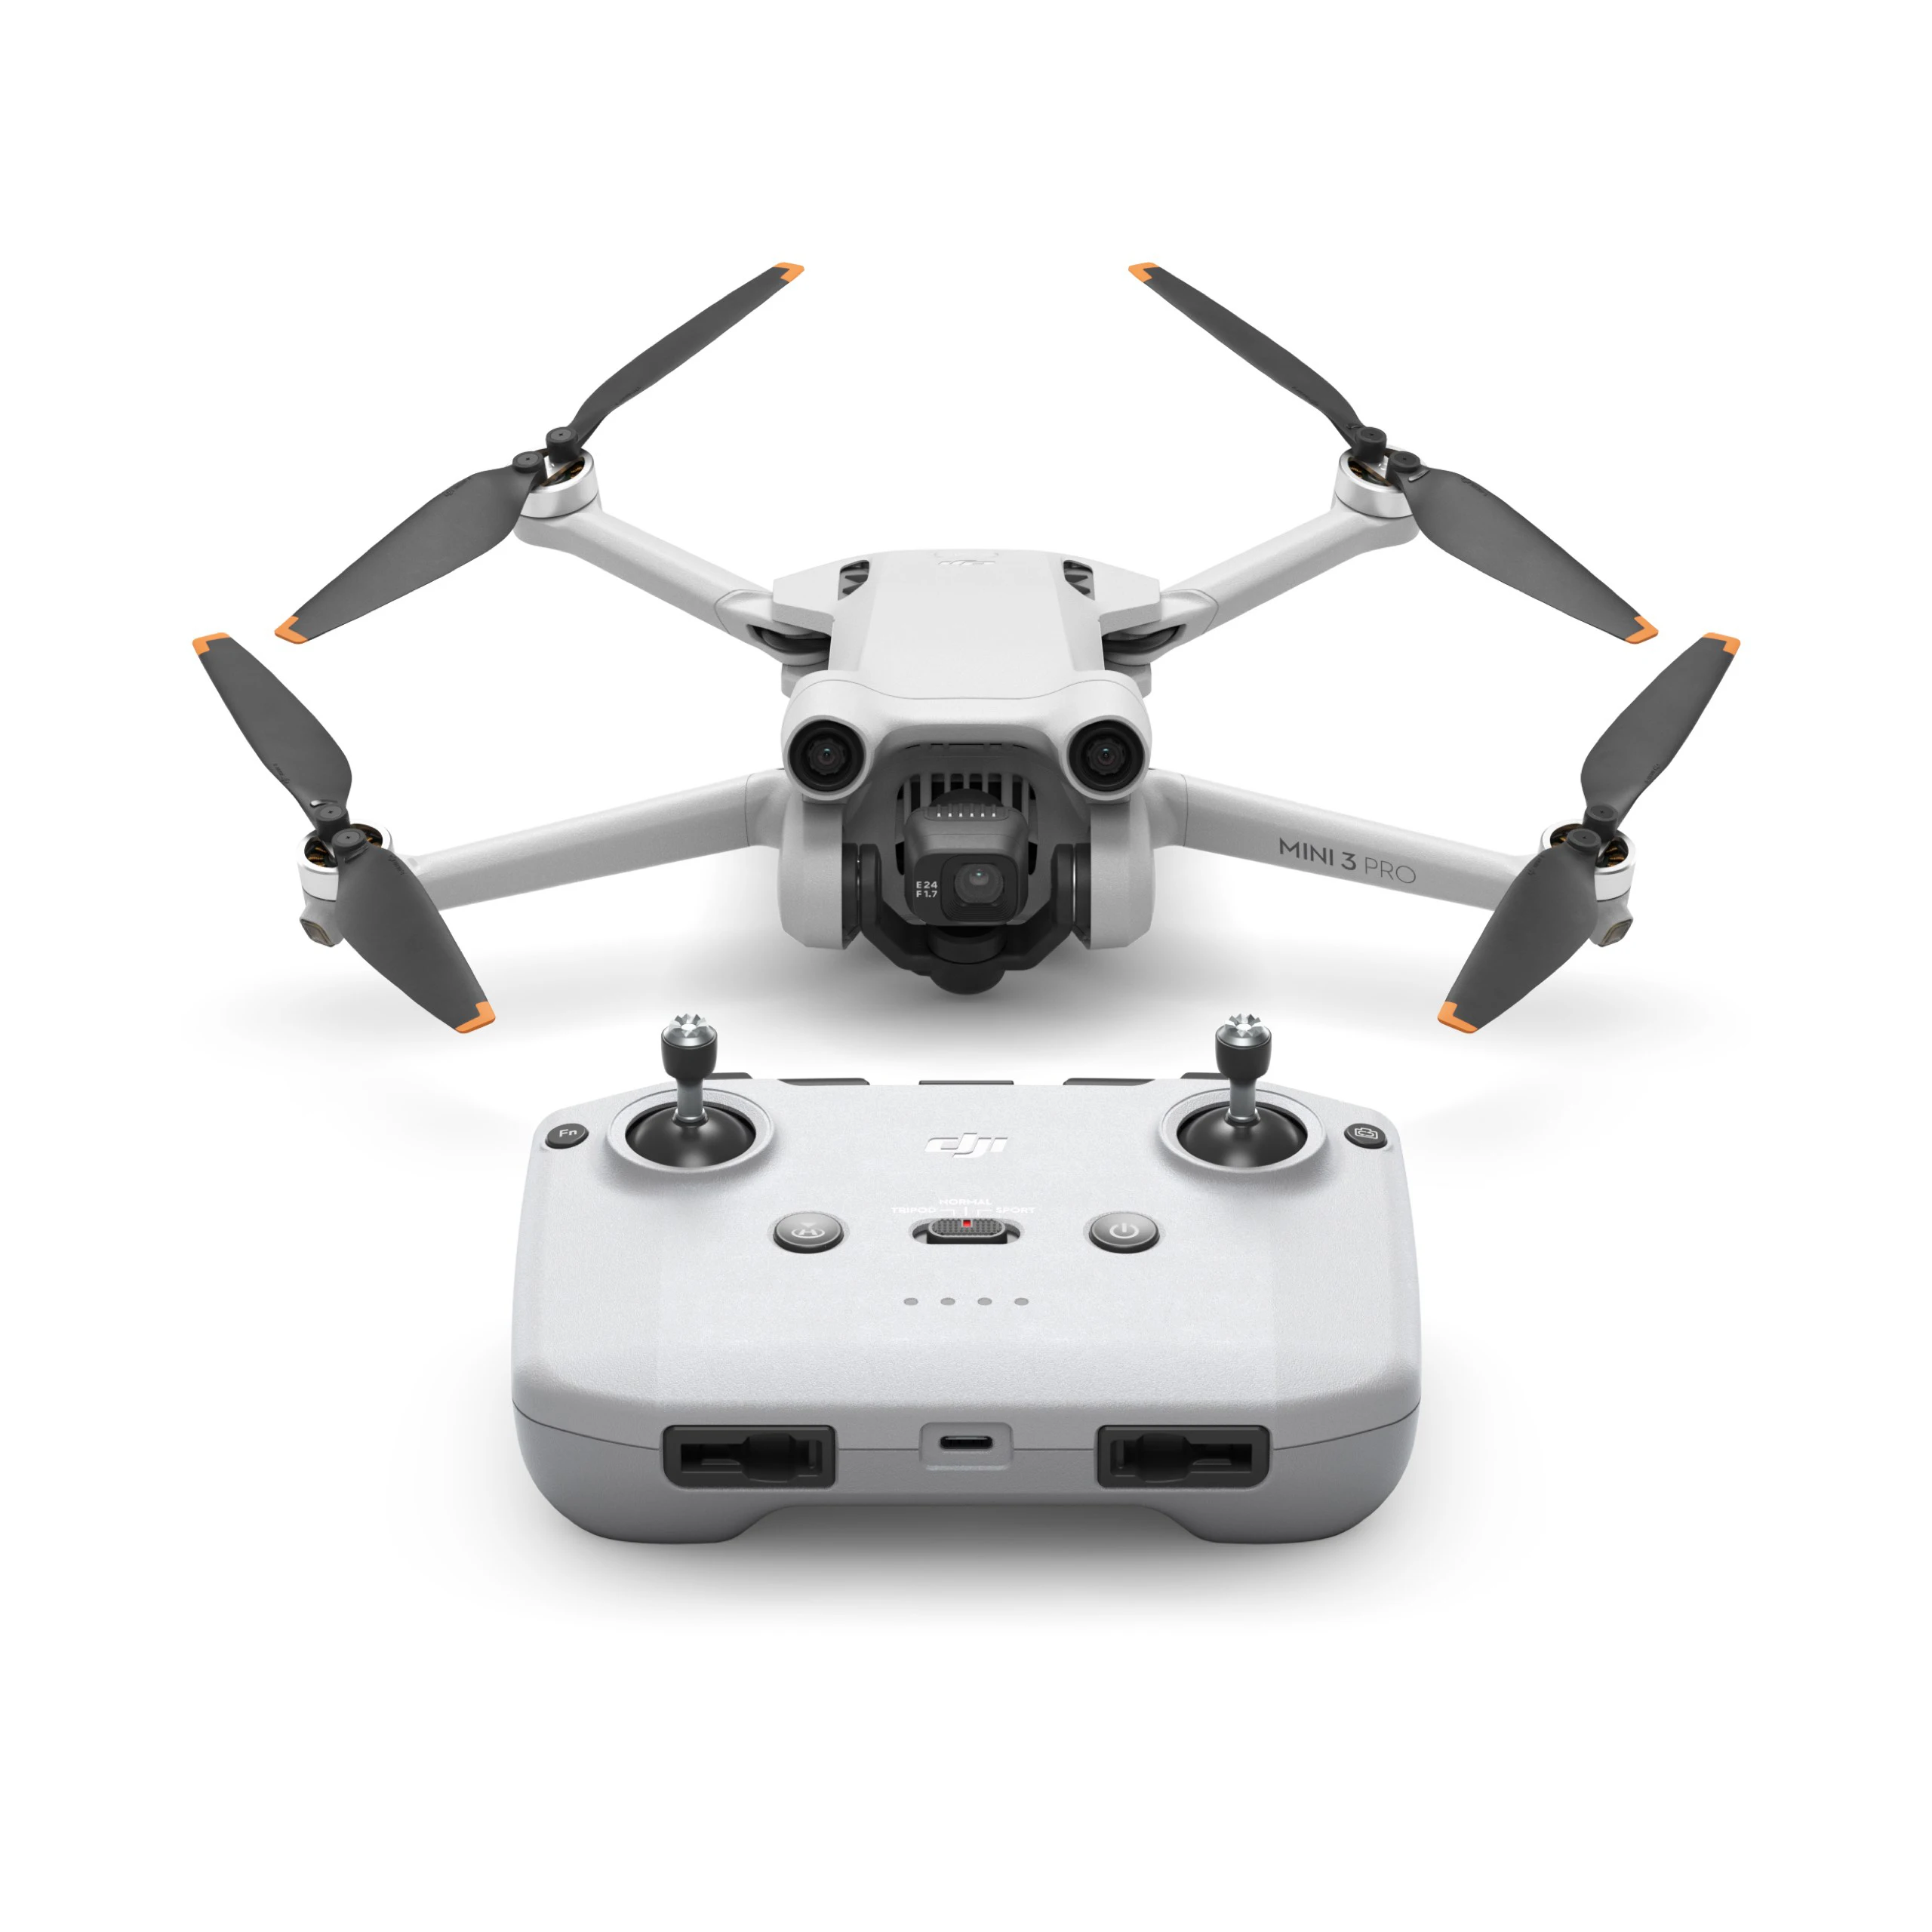 Begrafenis drinken verzekering 2022 New Drone Mini 3 Pro Rc With 34 Mins Flight Time With True Vertical  Shooting Vs Mini Air 2 Drone - Buy Mini Pro 3 Drone,Mini 3 Pro,Drone  Product on Alibaba.com